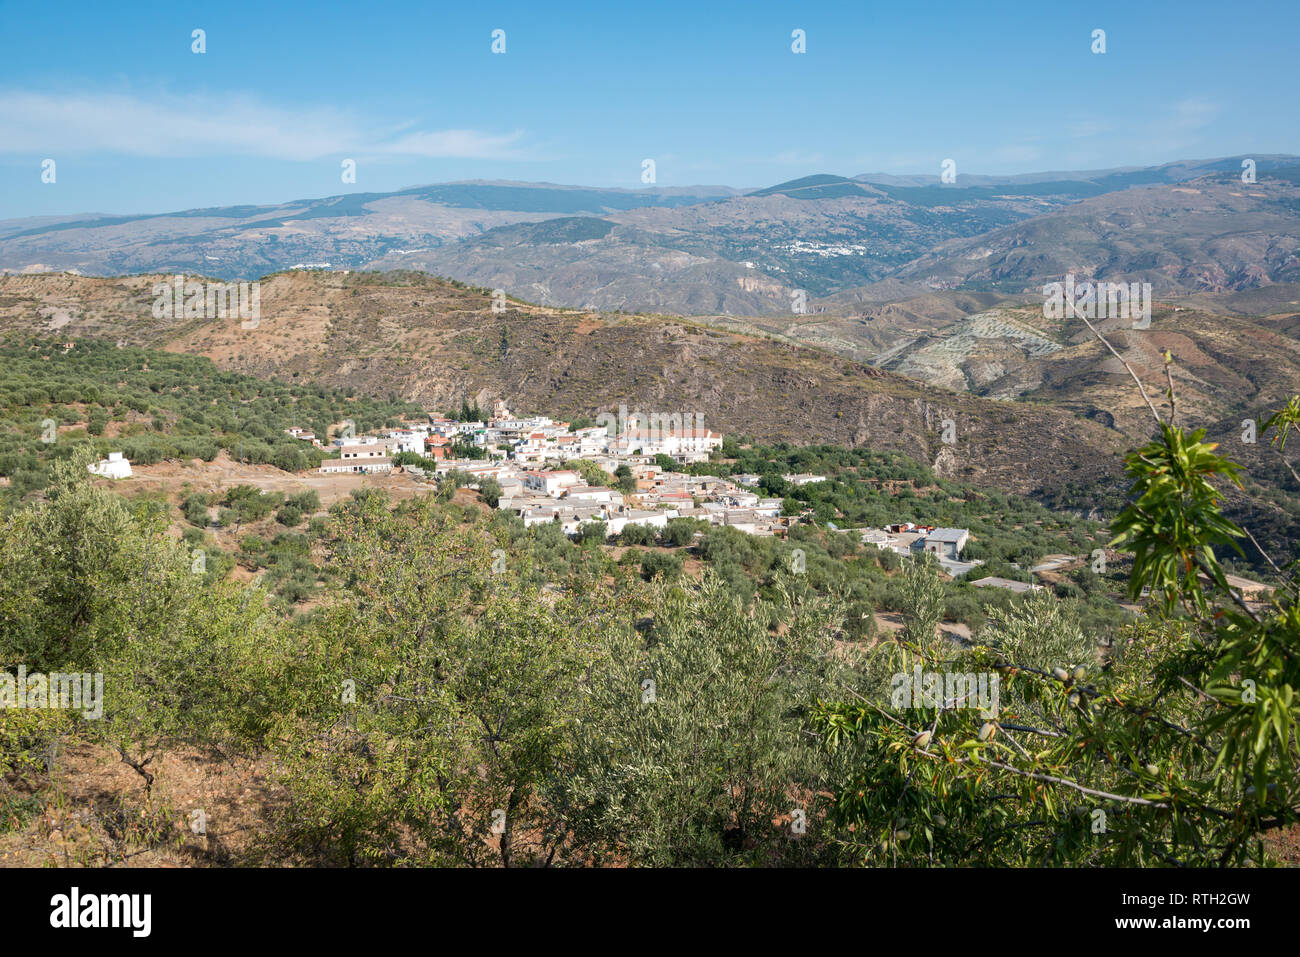 The town of Jorairatar in the Alpujarras mountains of Andalucia, Spain Stock Photo